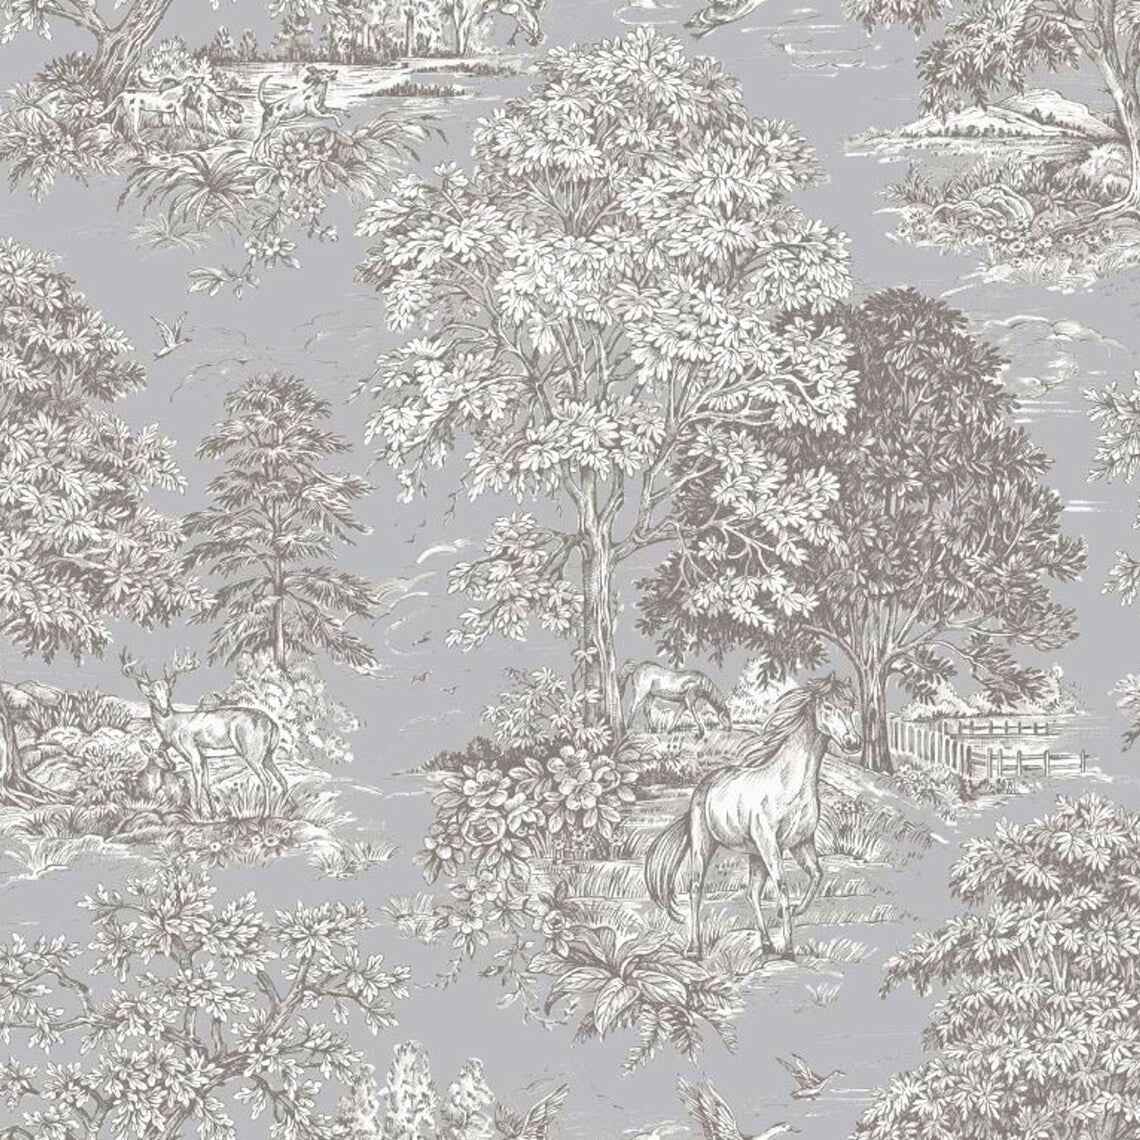 pillow sham in Yellowstone Dove Blue Gray Country Toile- Horses, Deer, Dogs- Large Scale